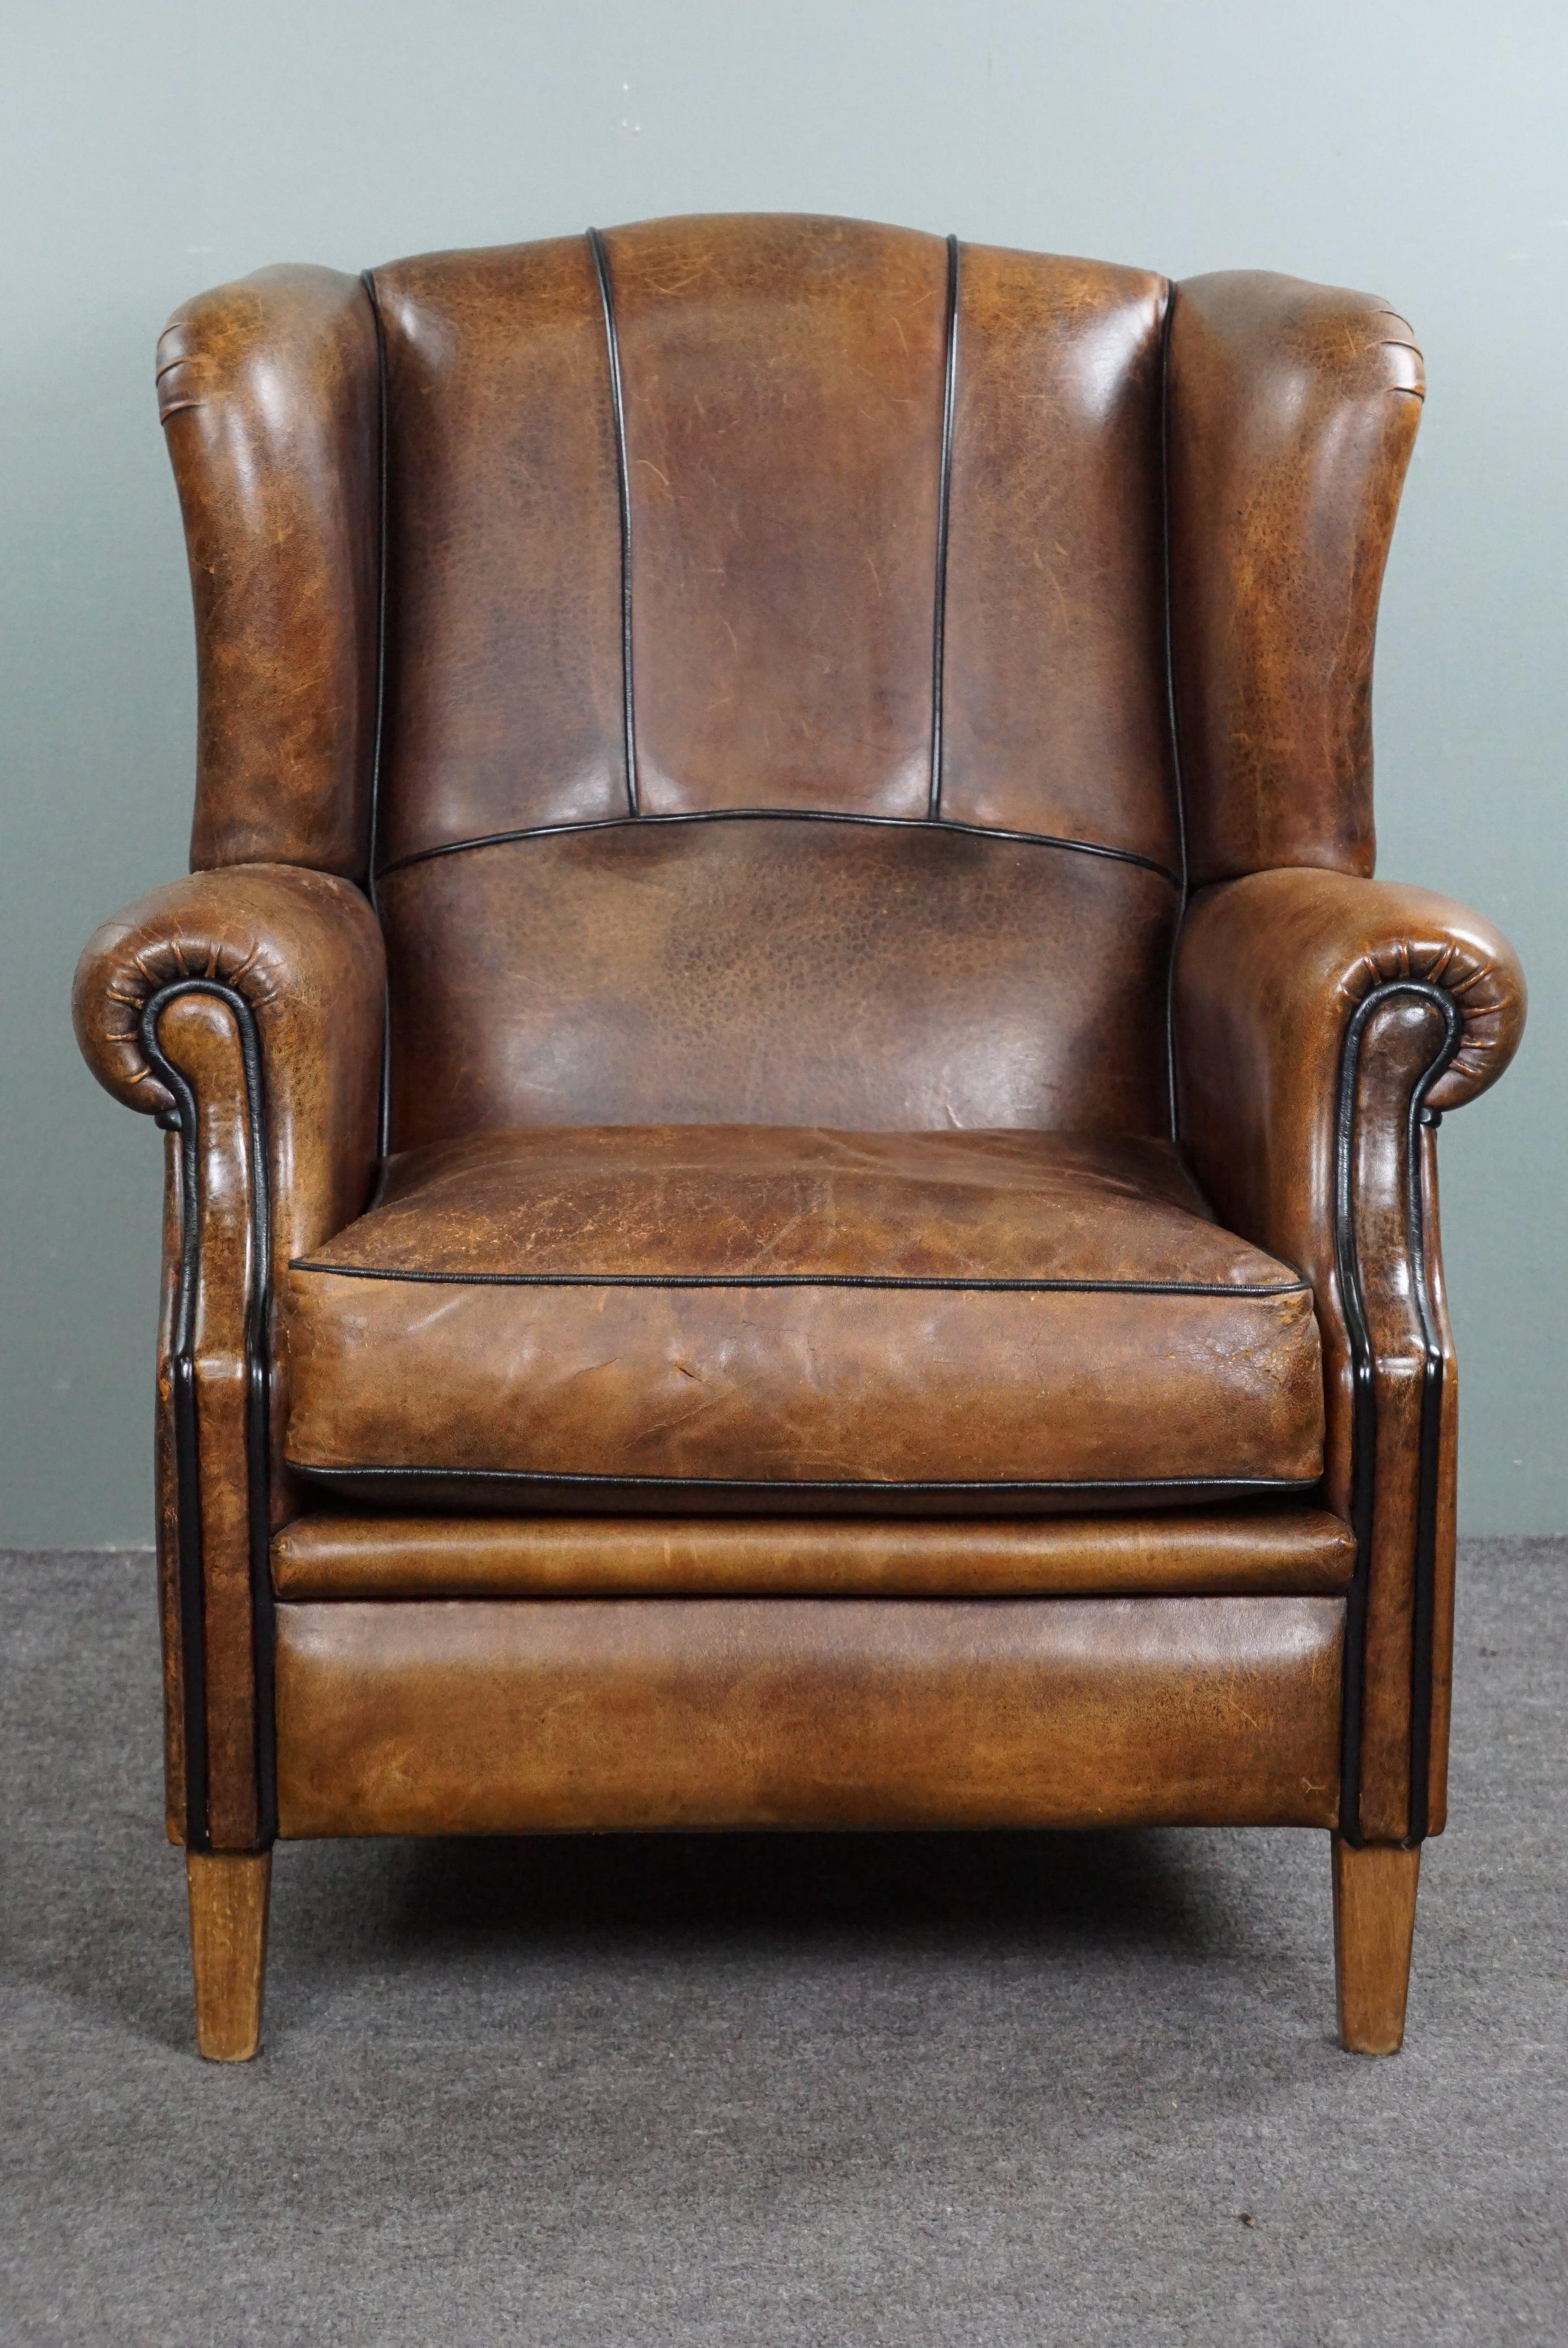 Offered byThijs is this well-fitting sheep leather wing chair with a very expressive division in the leather.

This sheepskin leather wing chair radiates character, with its sturdy appearance and cushion that testifies to years of comfortable